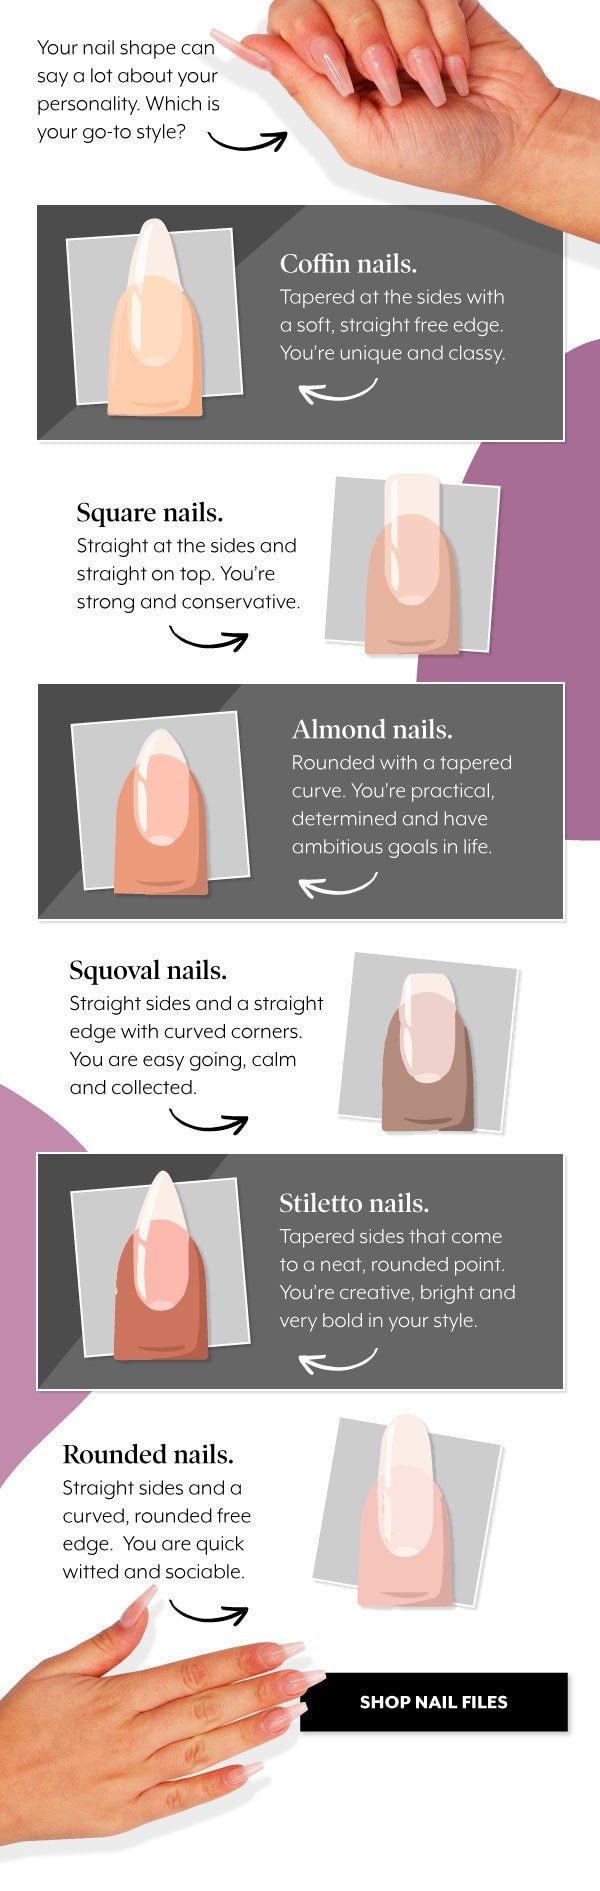 : Your nail shape explained | Milled